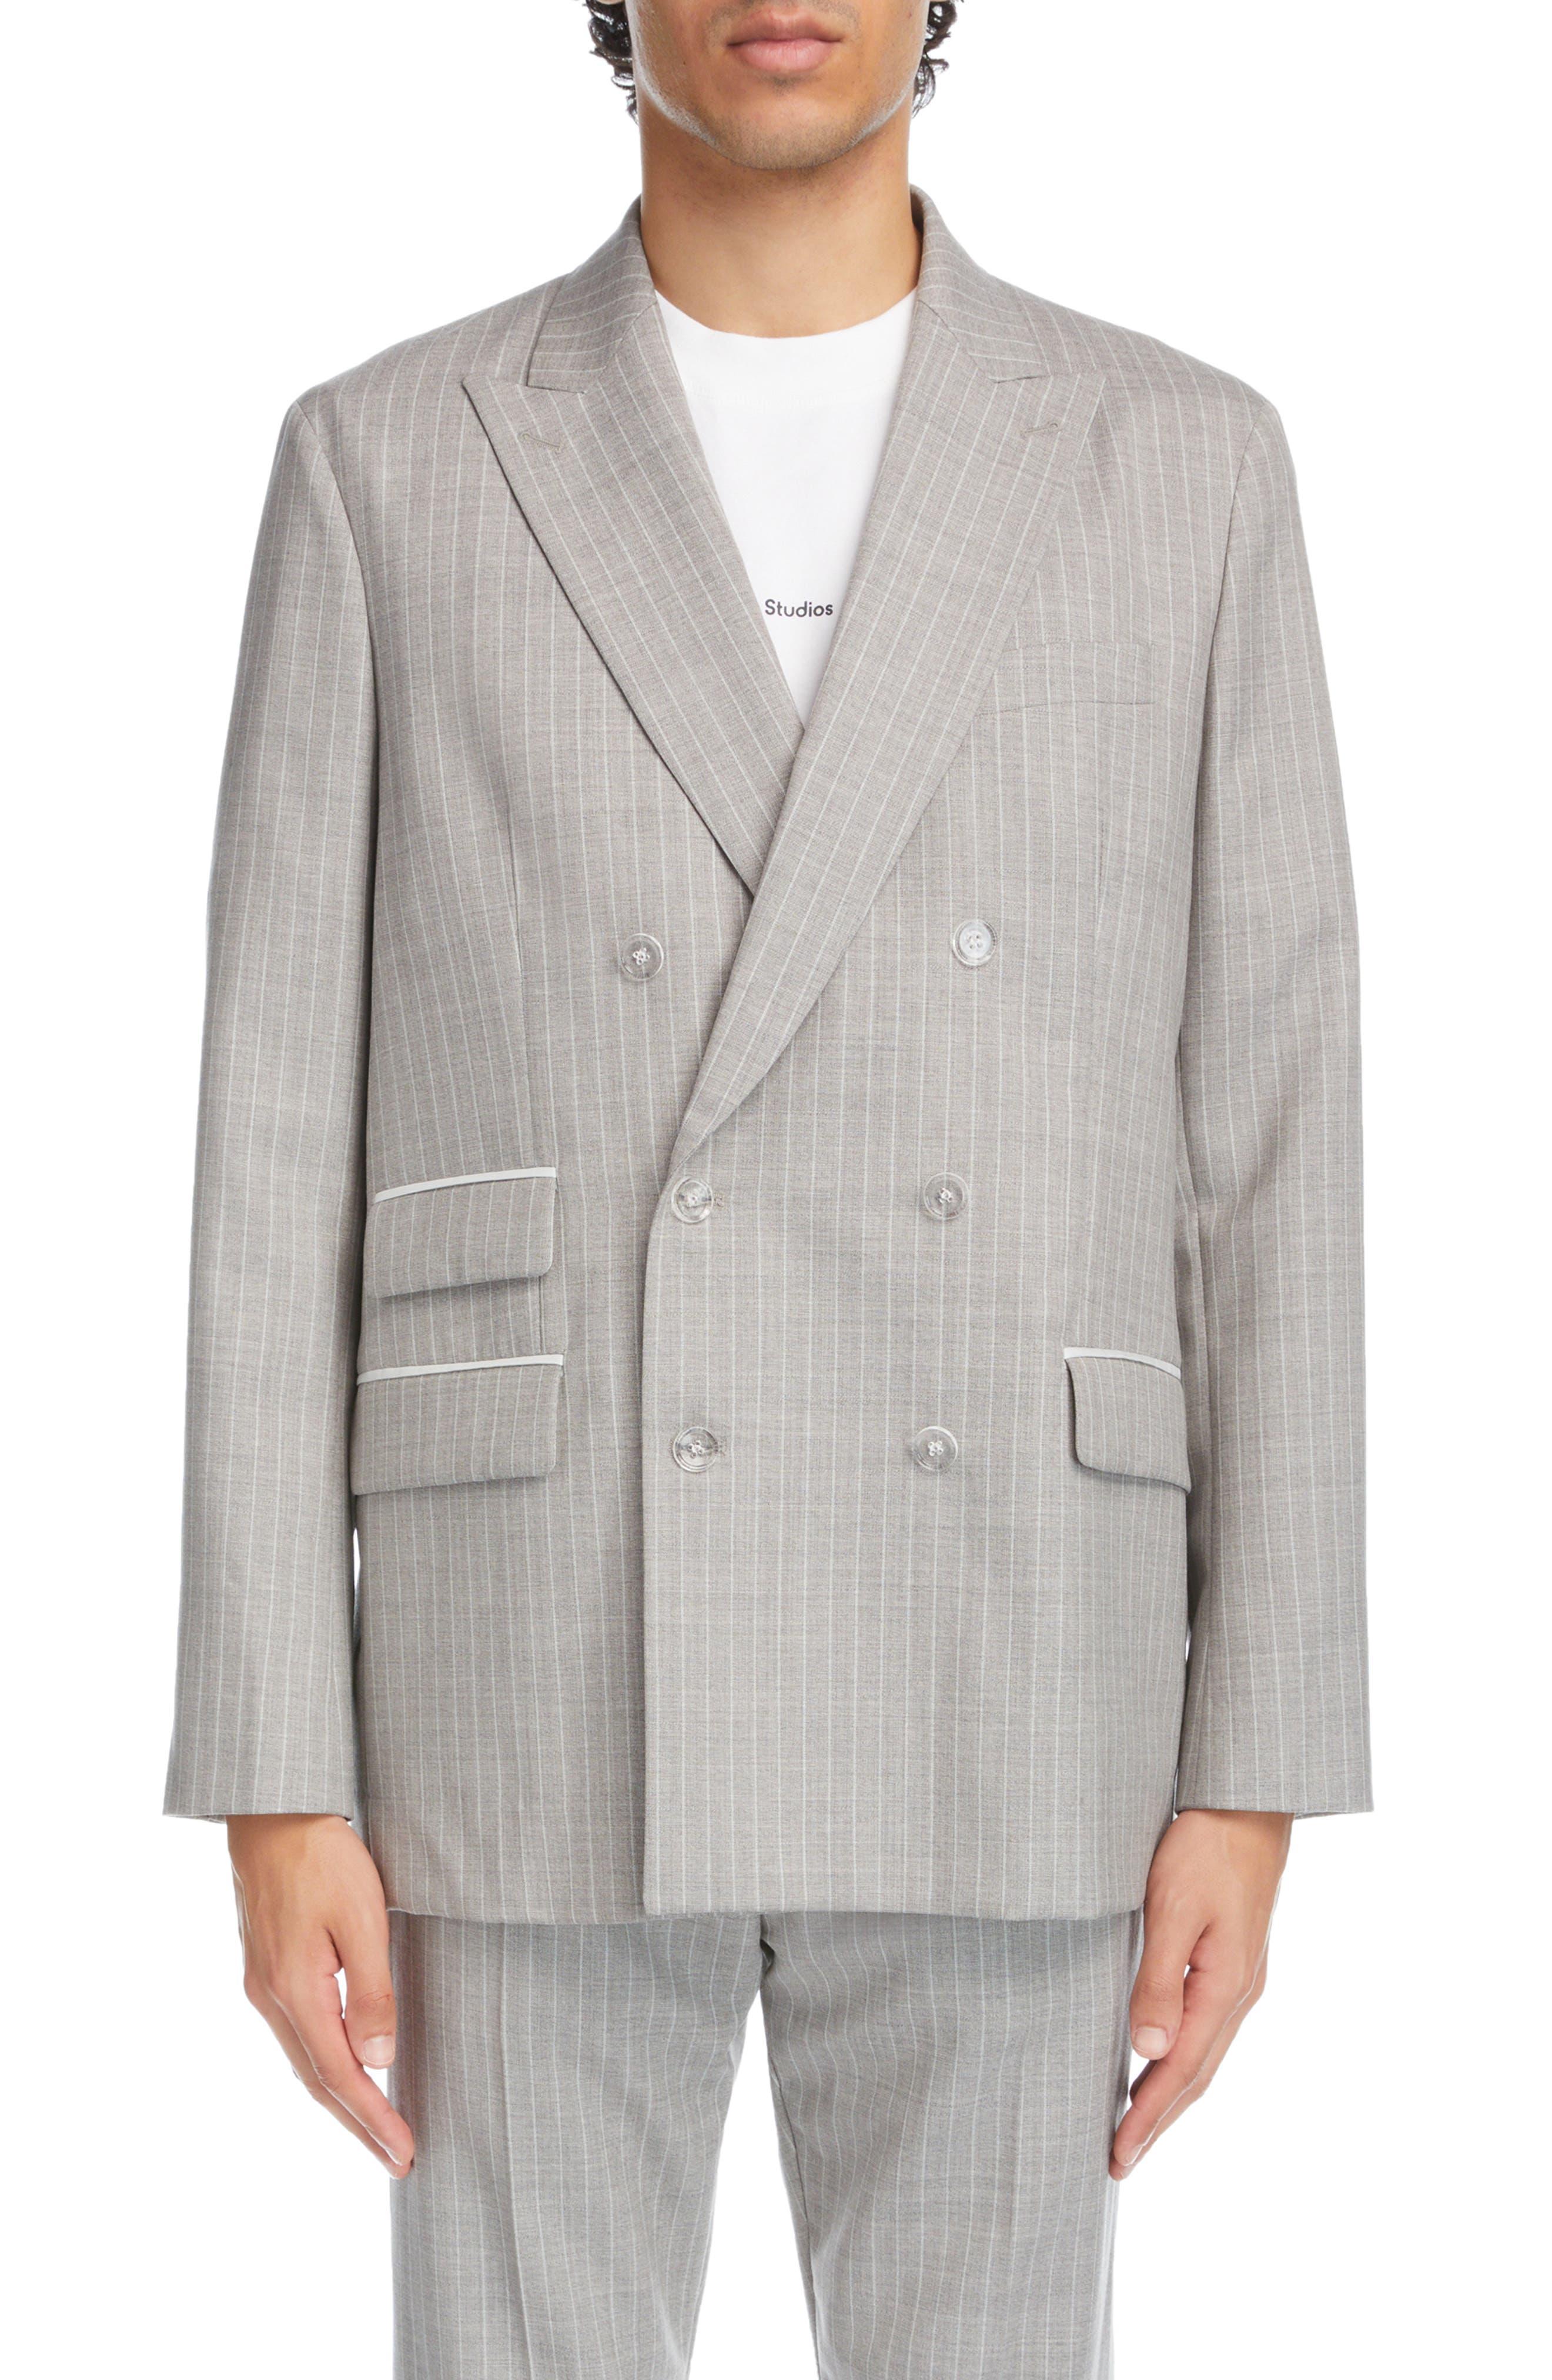 Acne Studios Pinstripe Double Breasted Wool Suit Jacket in Gray for Men ...